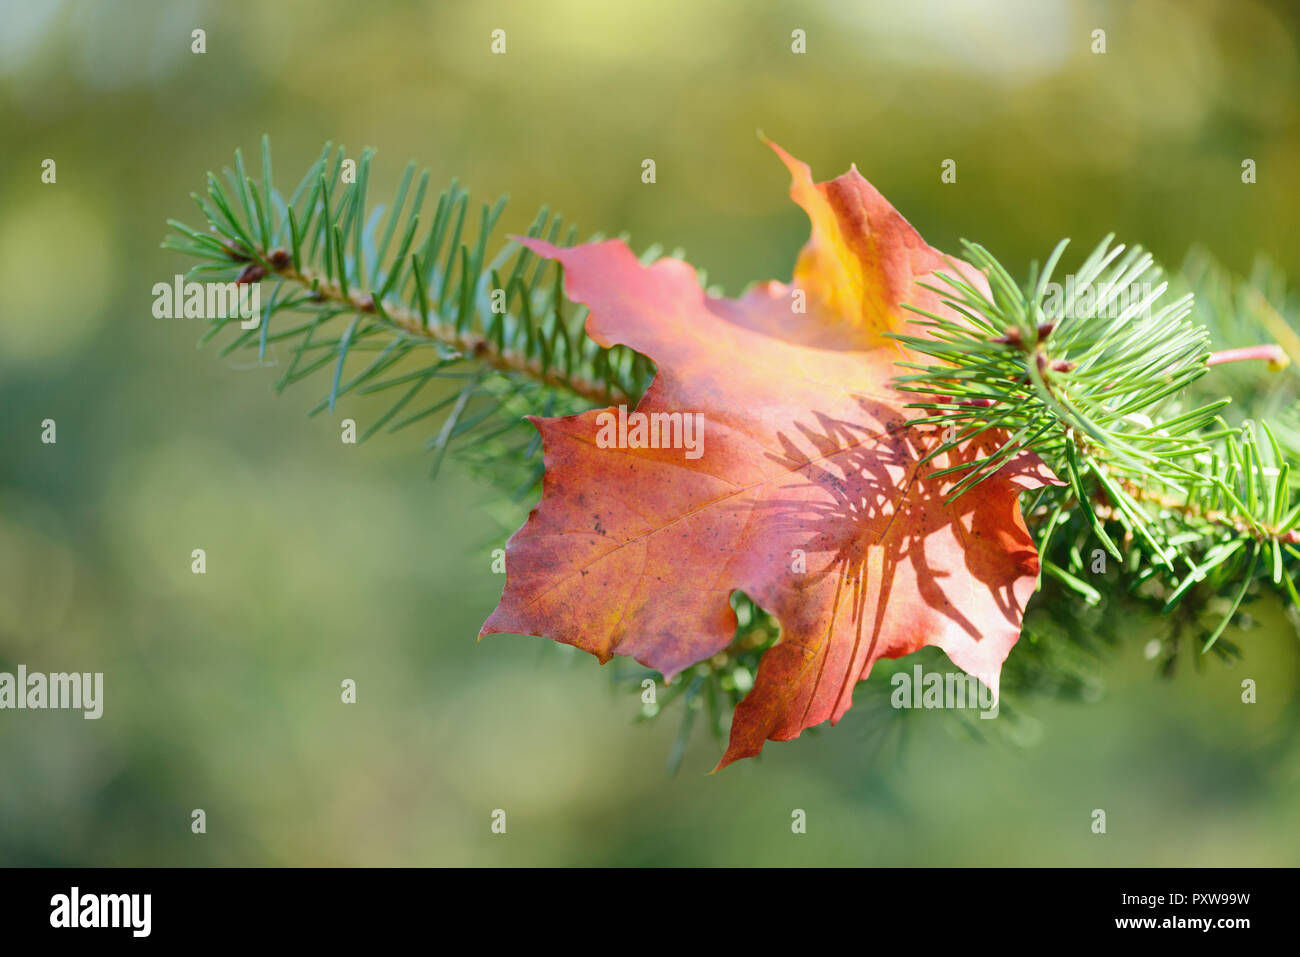 Fall, autumn, colored maple leaf on pine tree branch on a blurred background Stock Photo